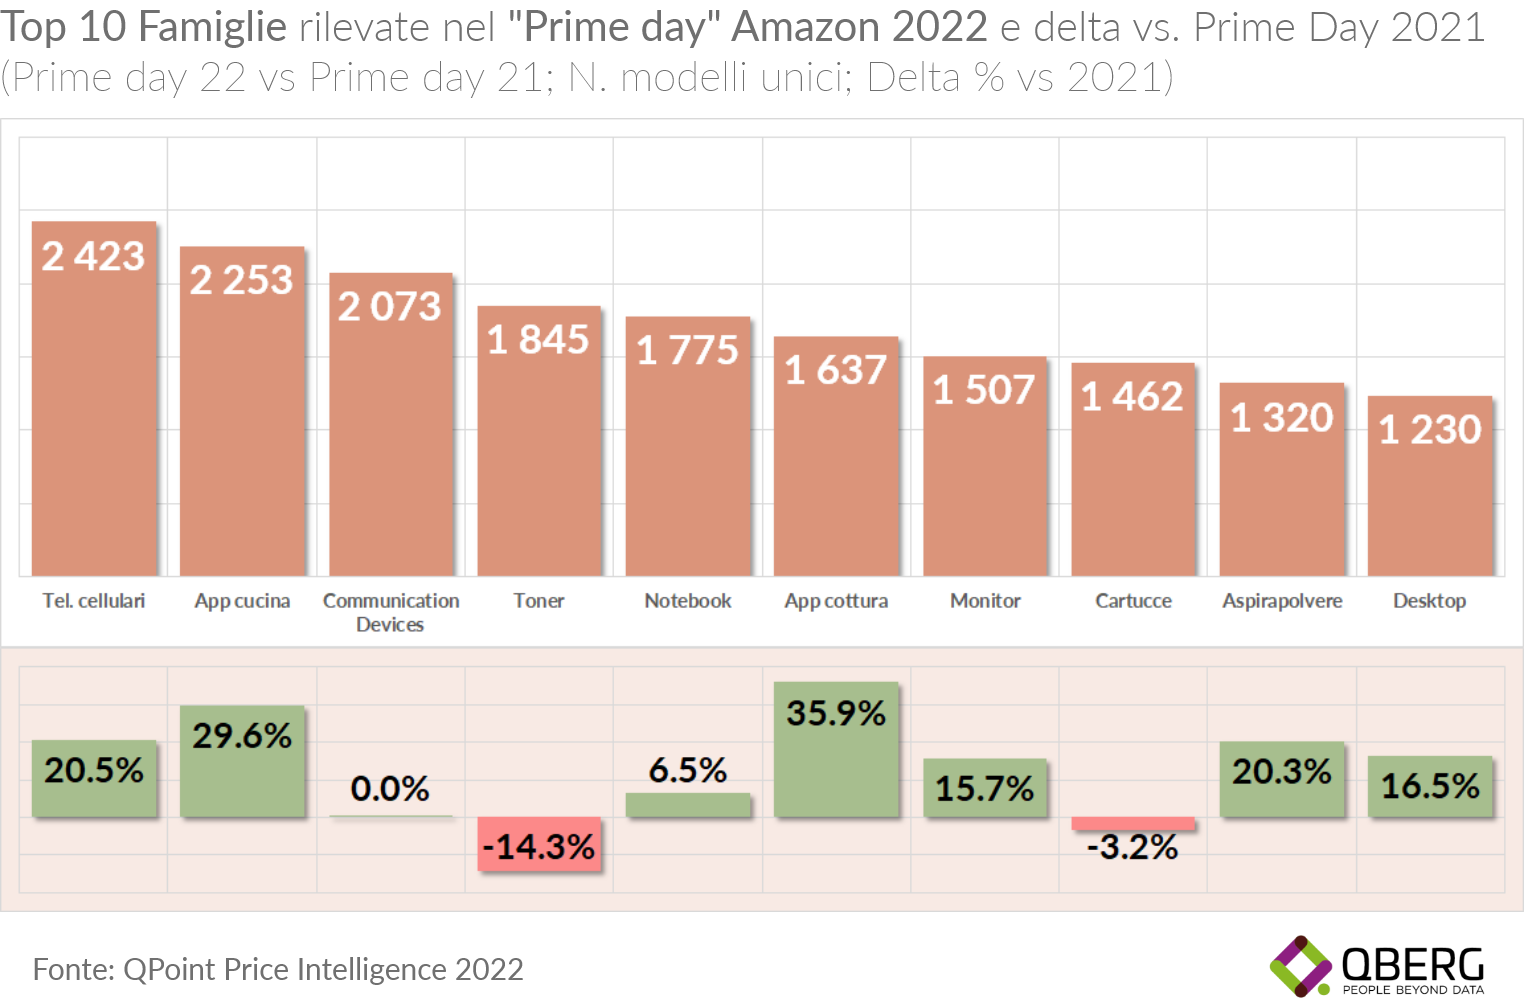 QBerg 1-top-10-famiglie-prime-day-amazon-2022.png